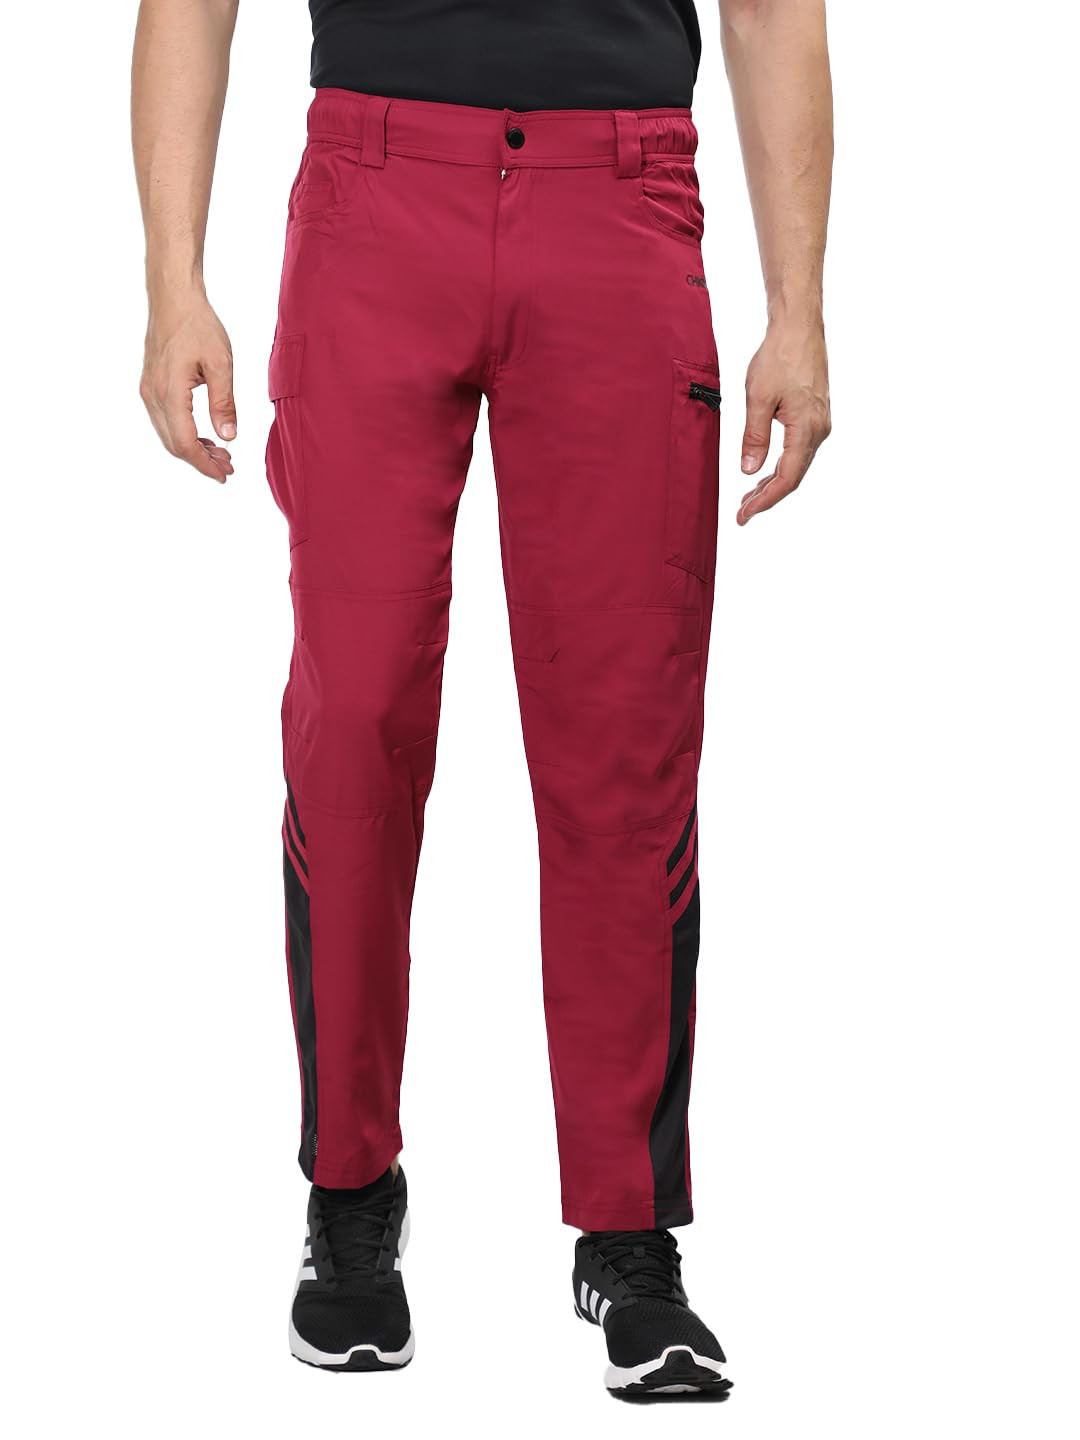 Red Camel Printed Mens Cotton Army Cargo Pants at Rs 290/piece in Kolkata |  ID: 20683450591